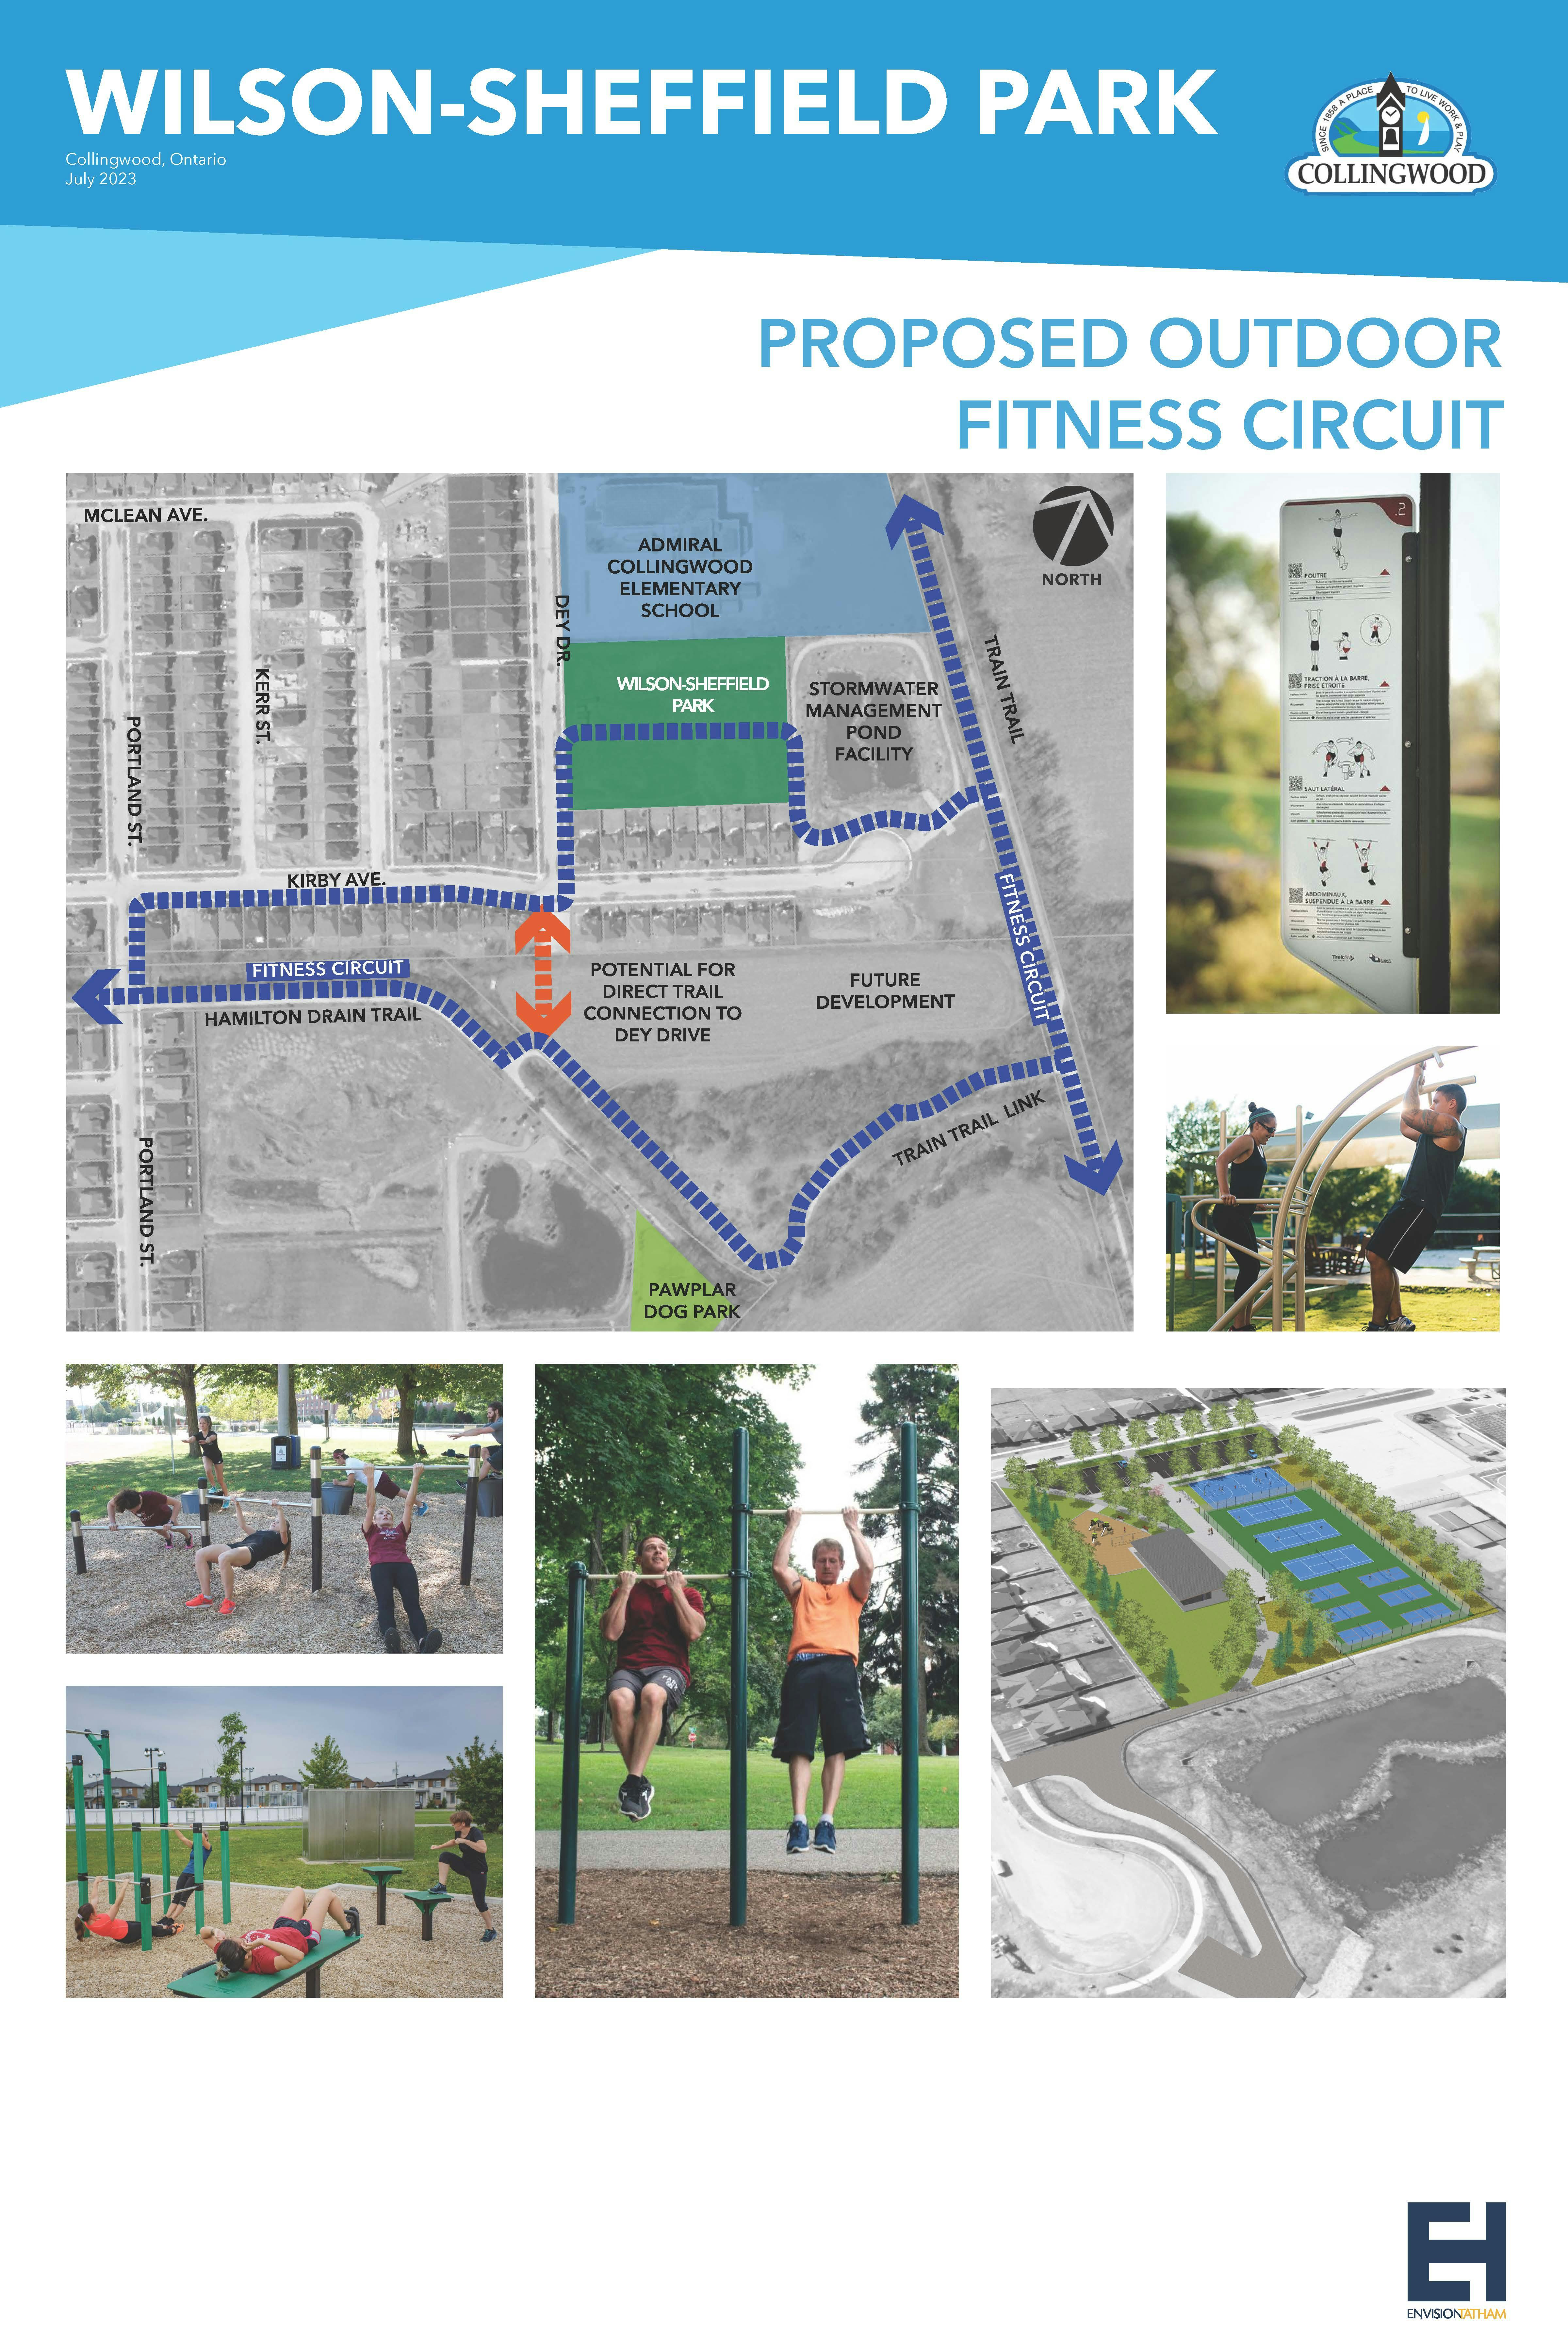 Proposed fitness loop marked in blue.